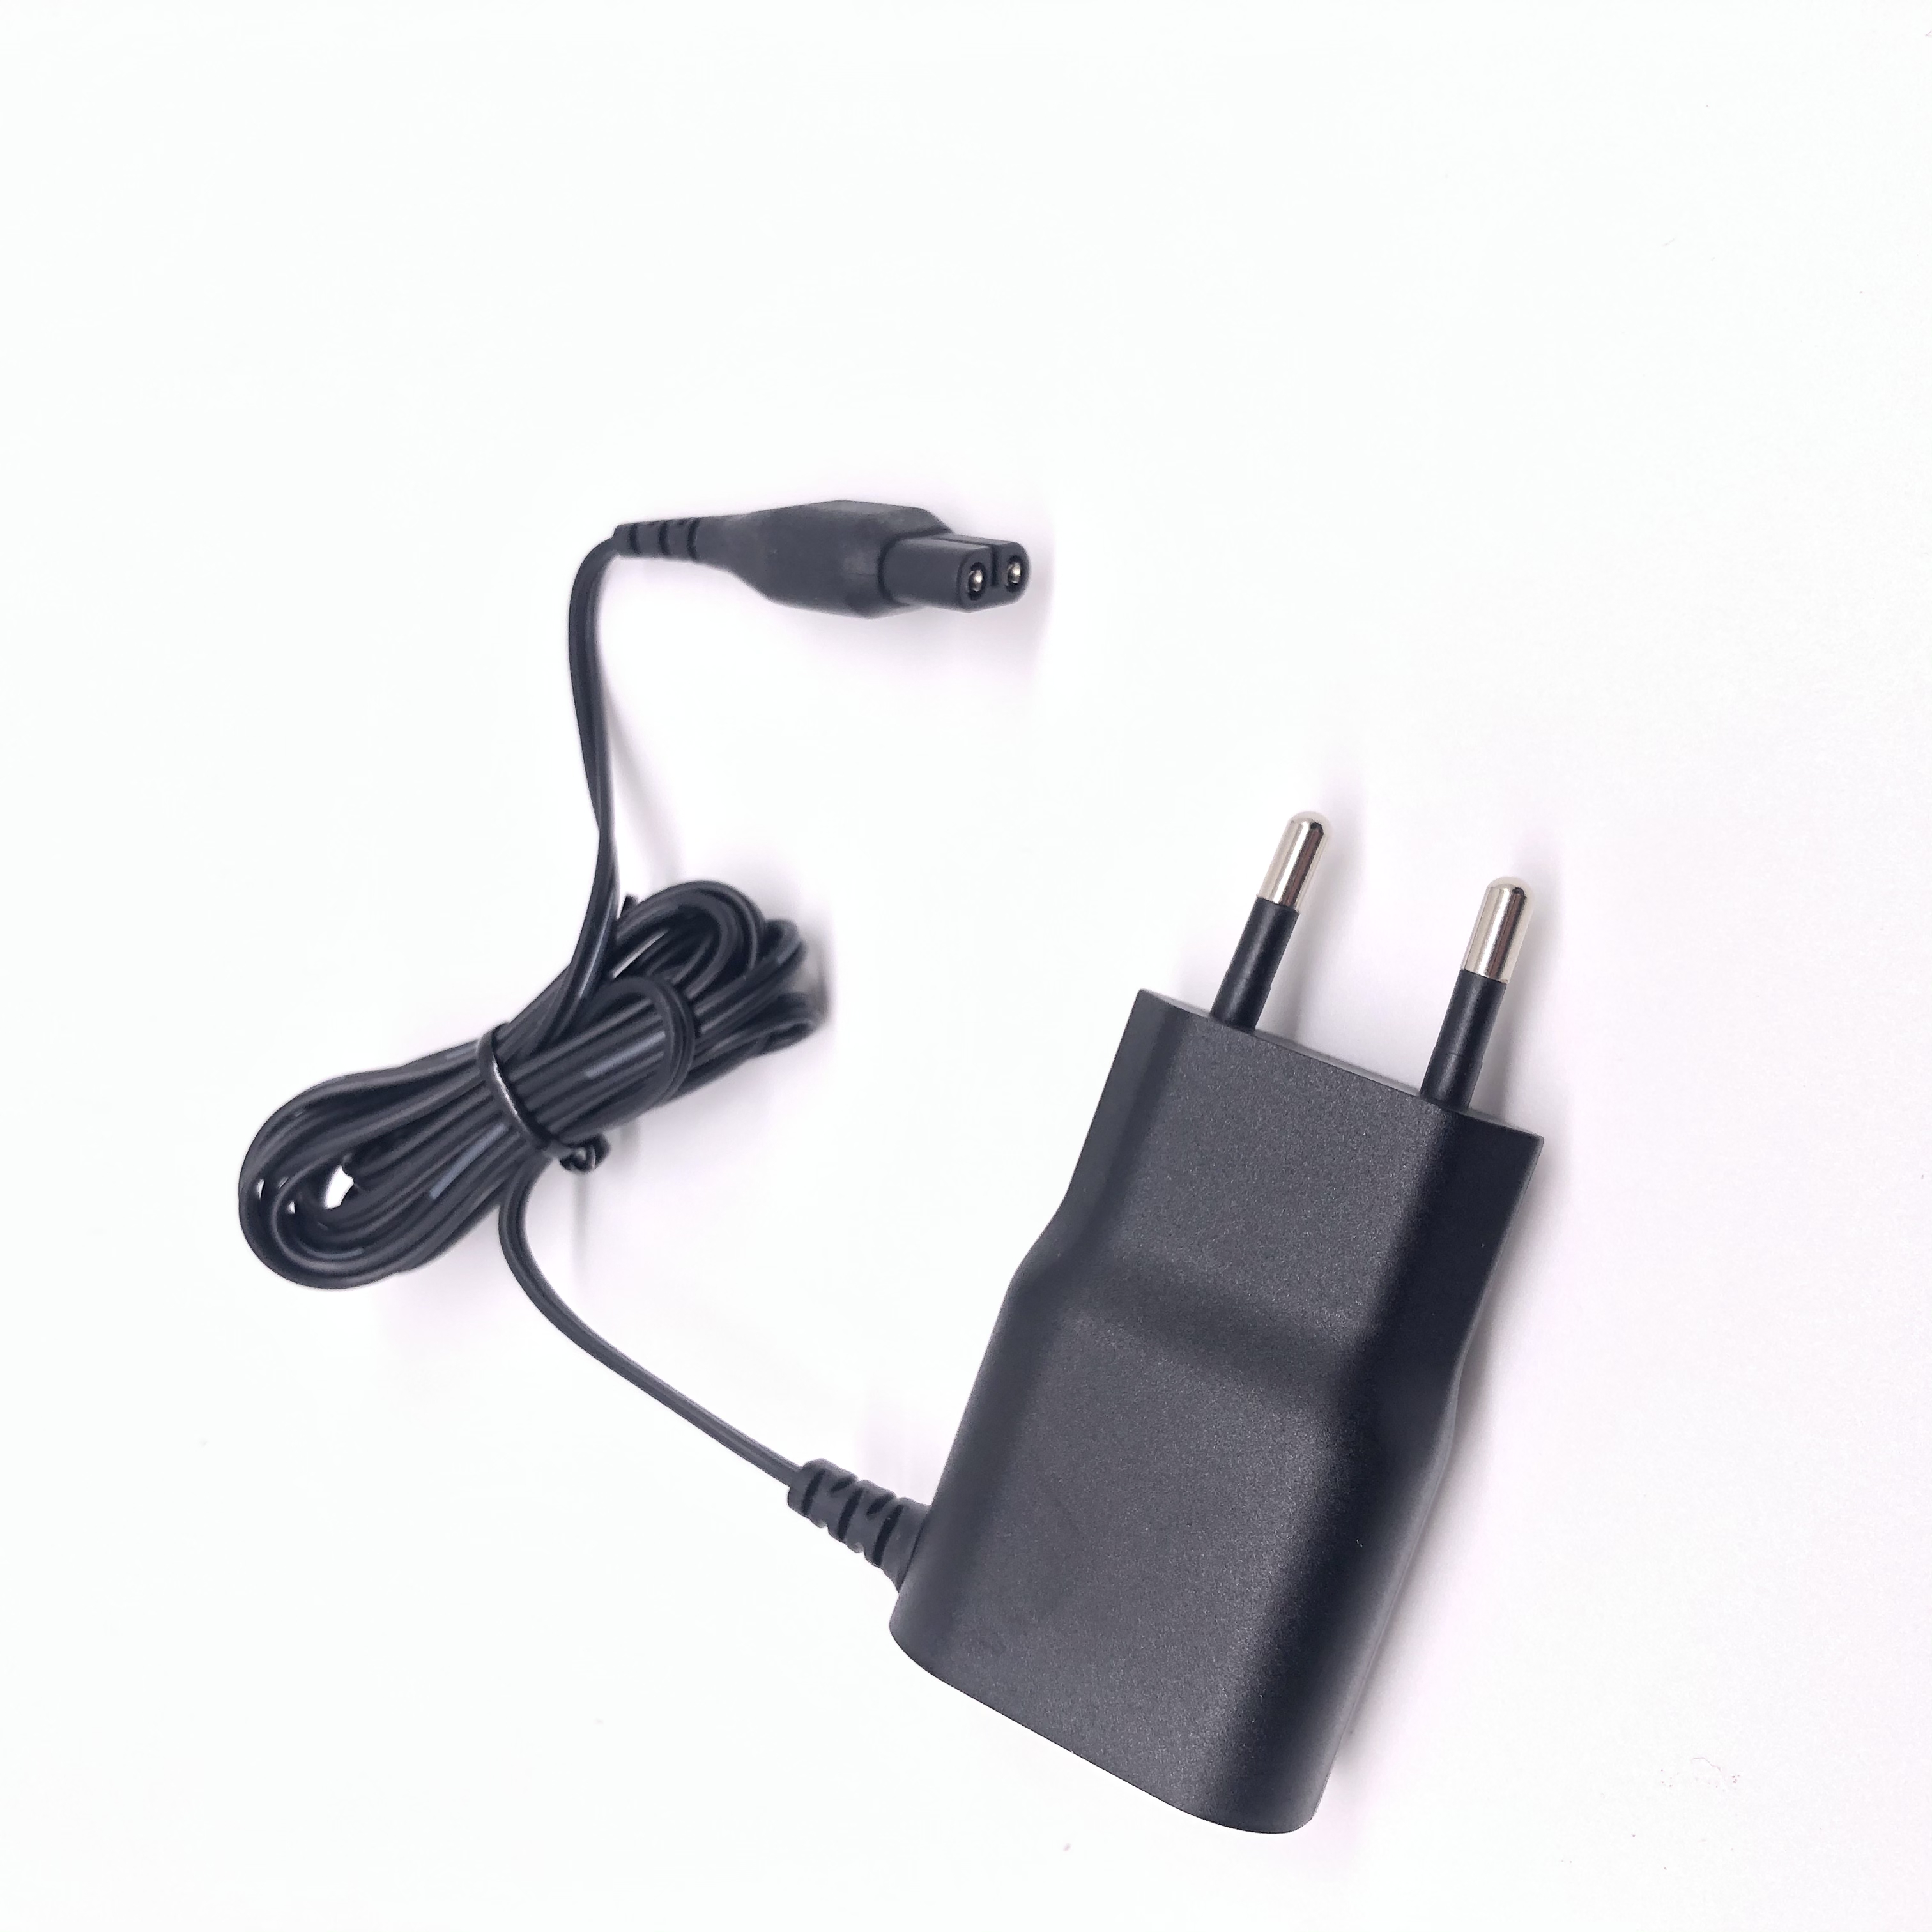 5.5v 600ma  power supply adapter EU plug charger for WV2 WV50 window cleaner